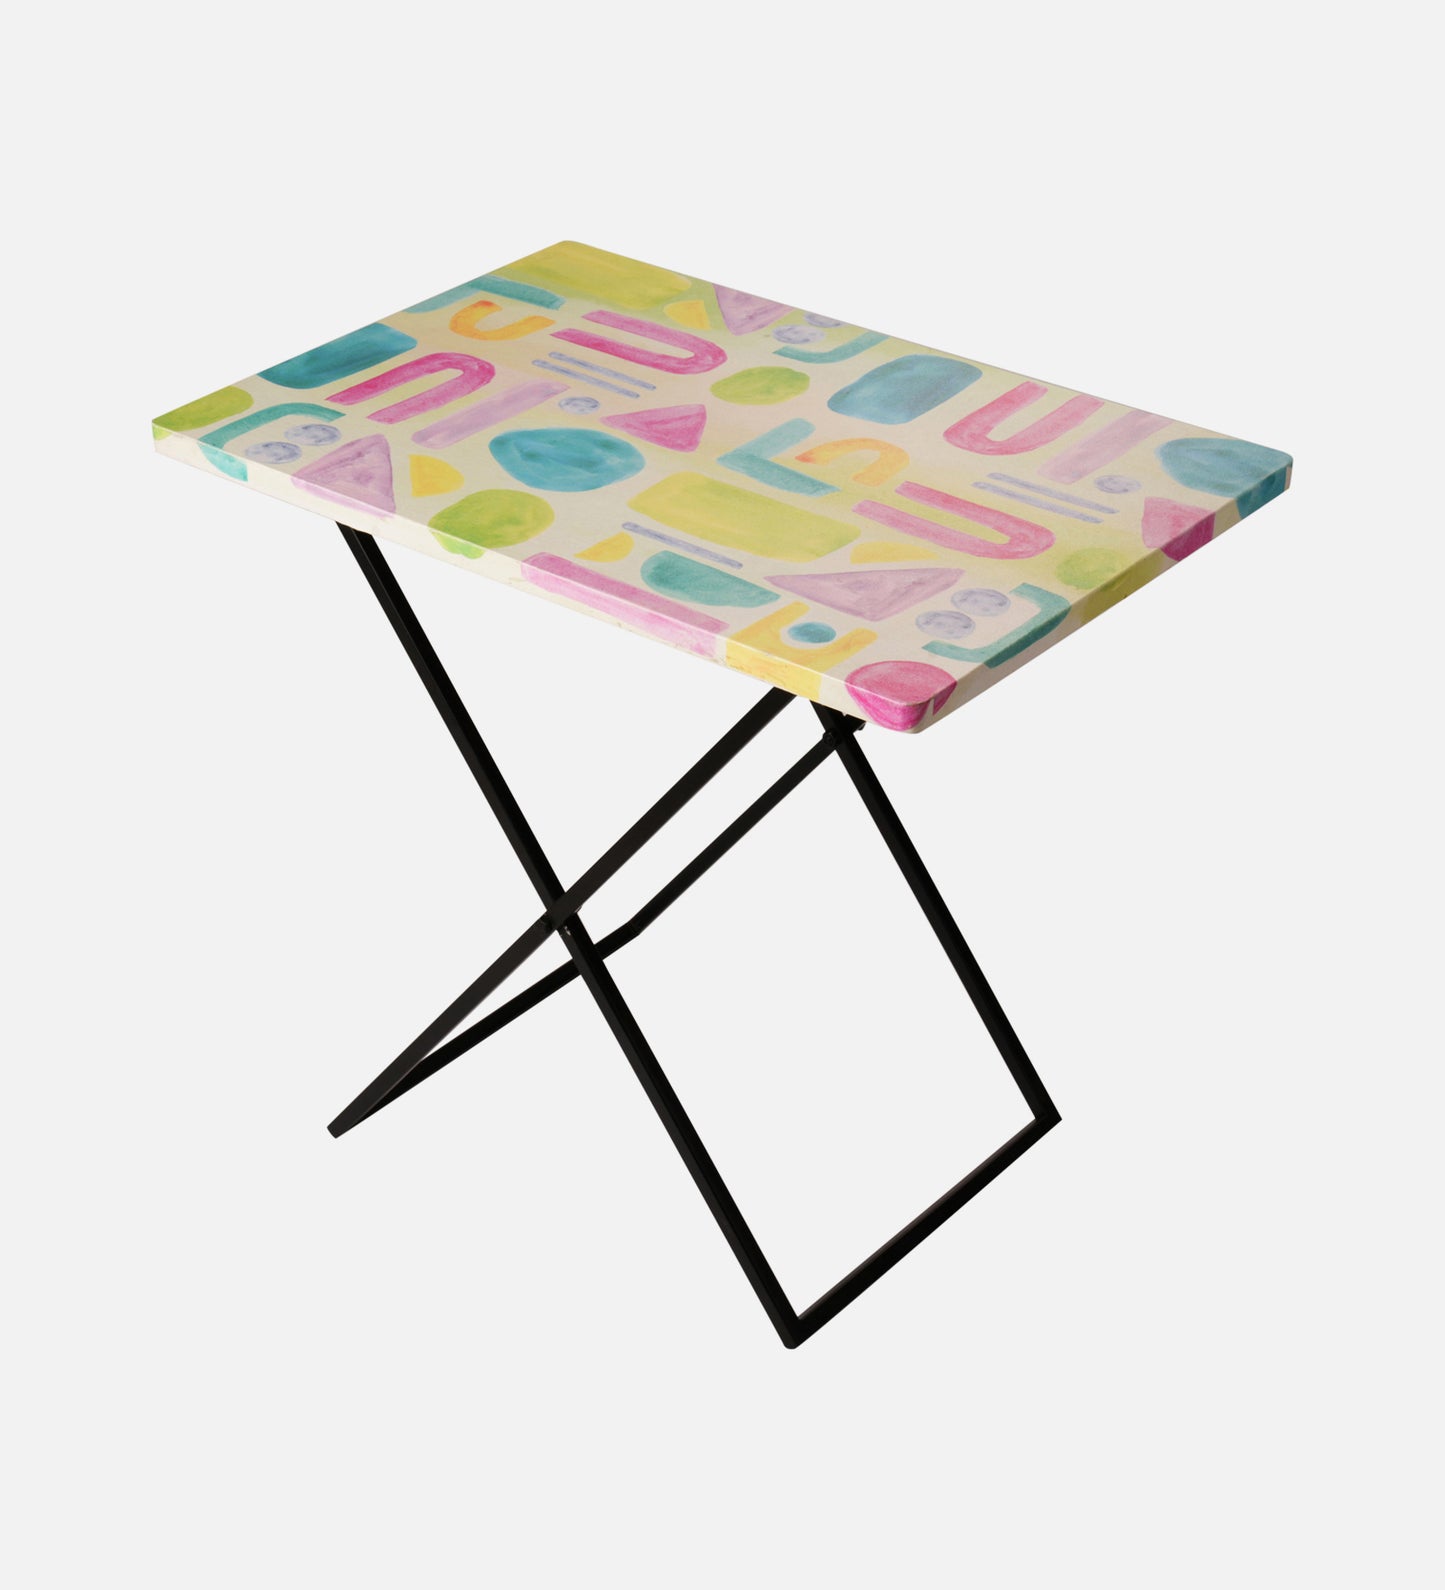 Tiny Doodles Criss Cross Side Tables, Writing Tables, Wooden Tables, Kids Tables, End Tables Living Room Decor by A Tiny Mistake